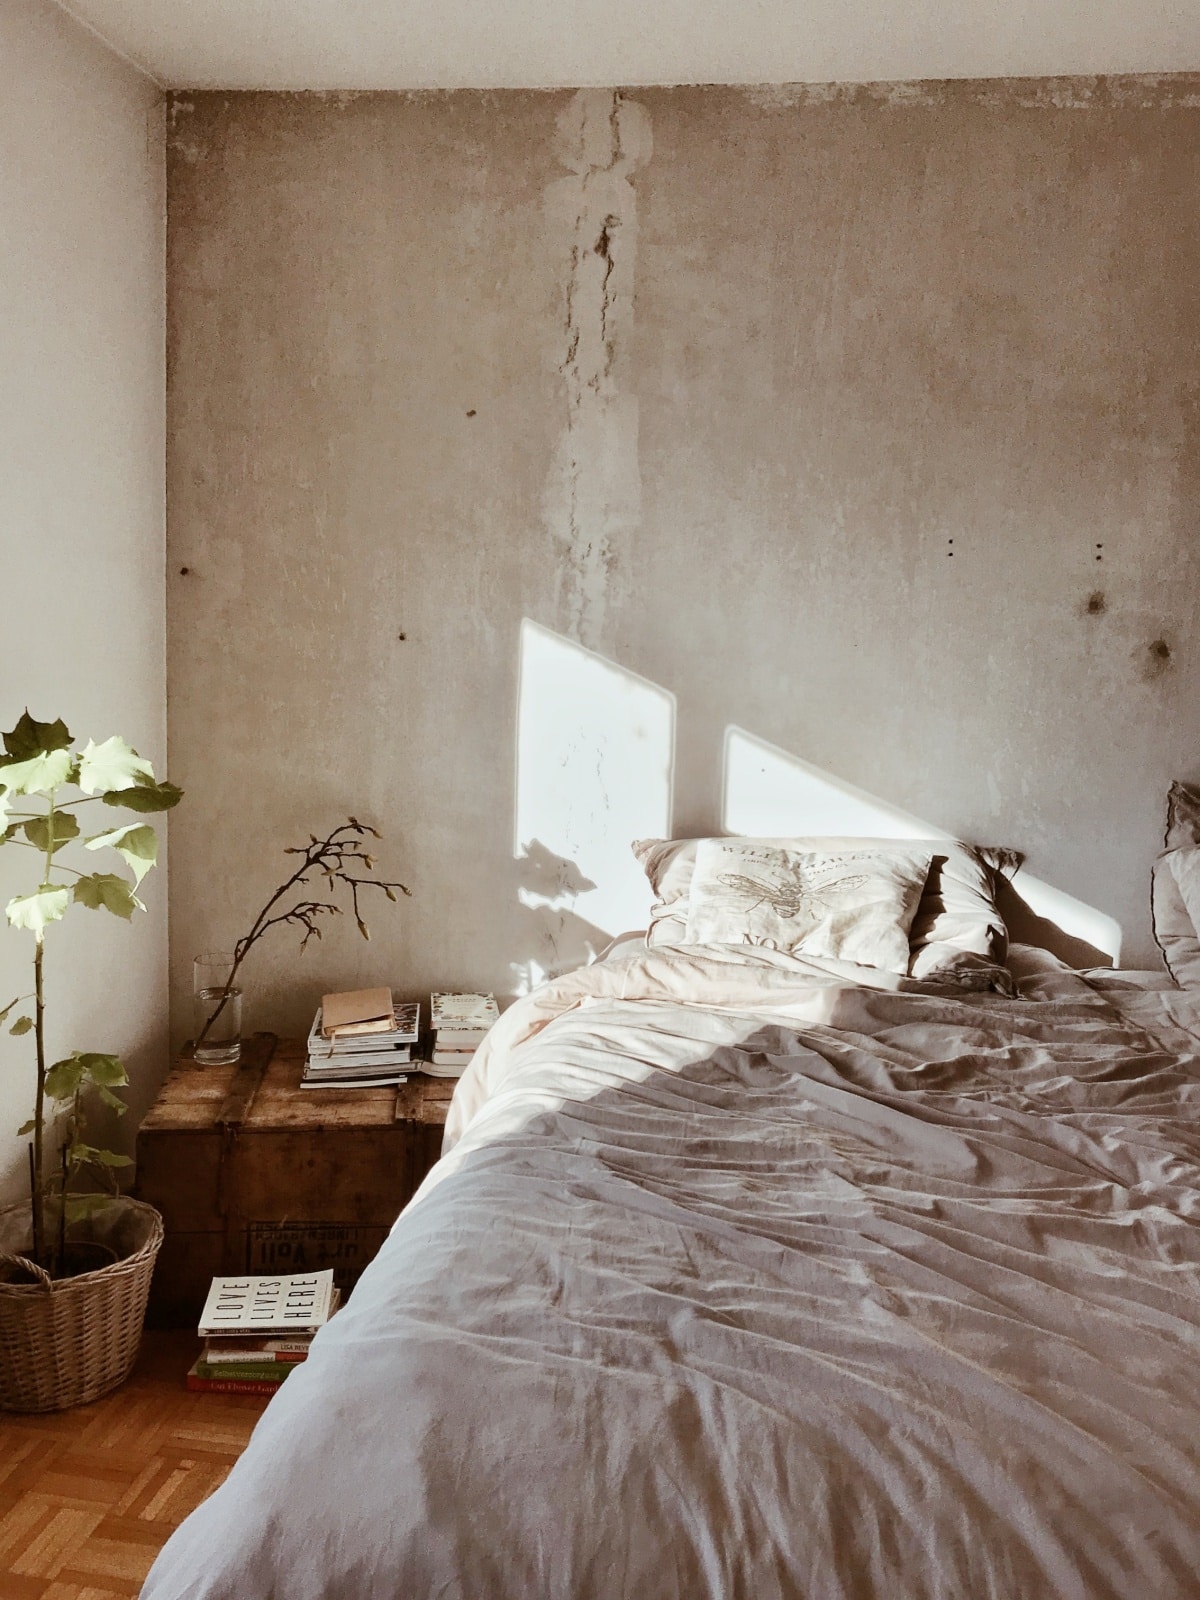 Bedroom with disheveled bed and concrete wall